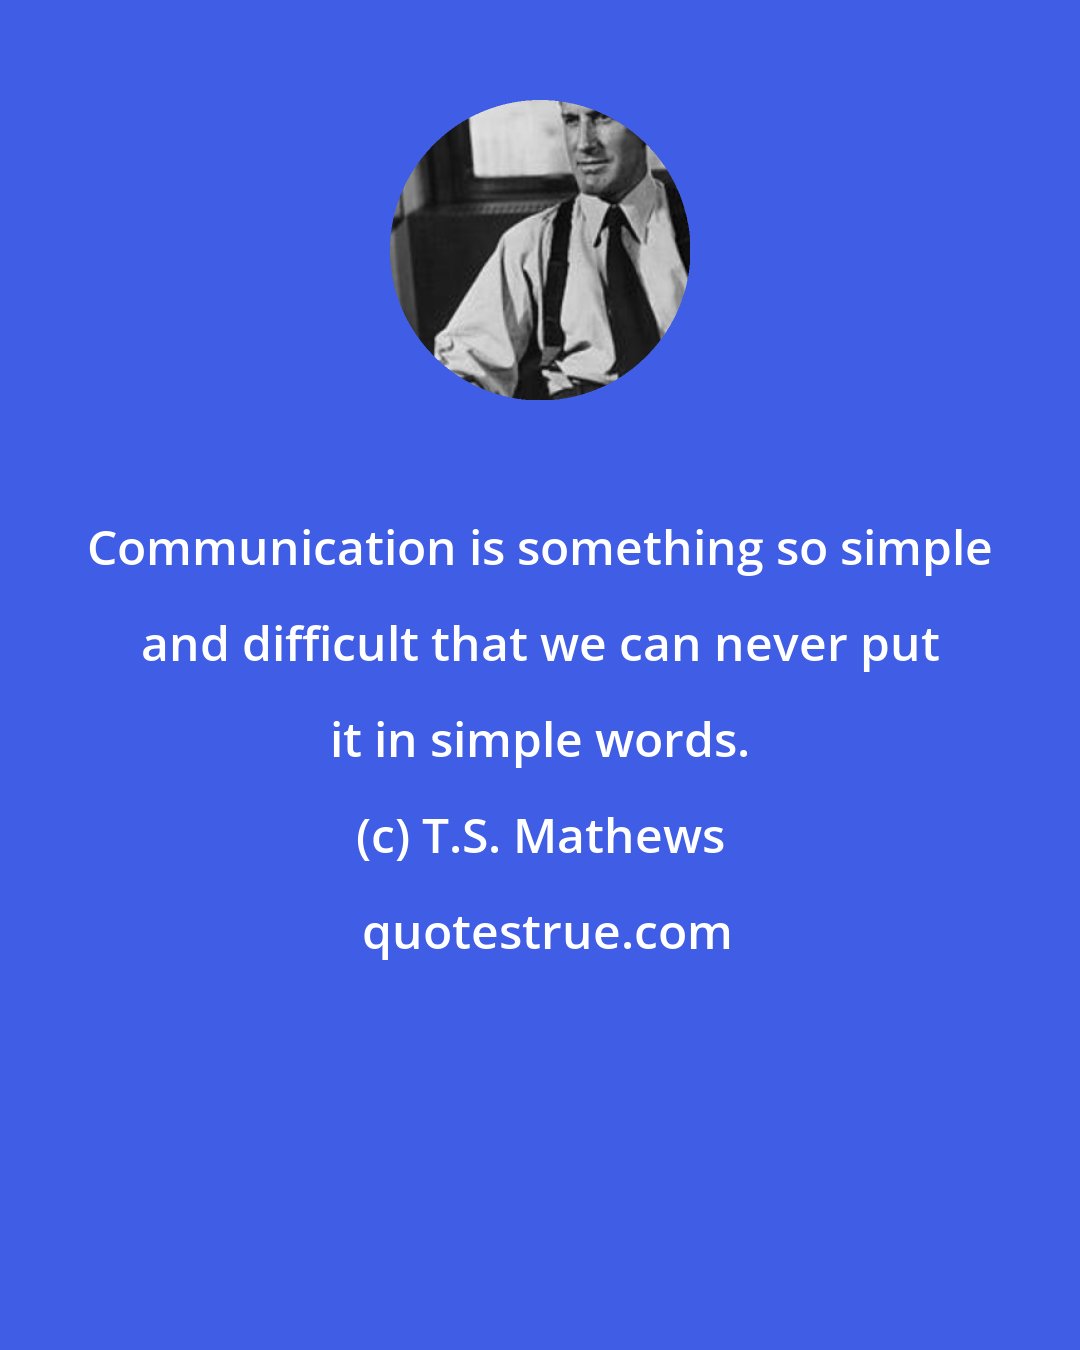 T.S. Mathews: Communication is something so simple and difficult that we can never put it in simple words.